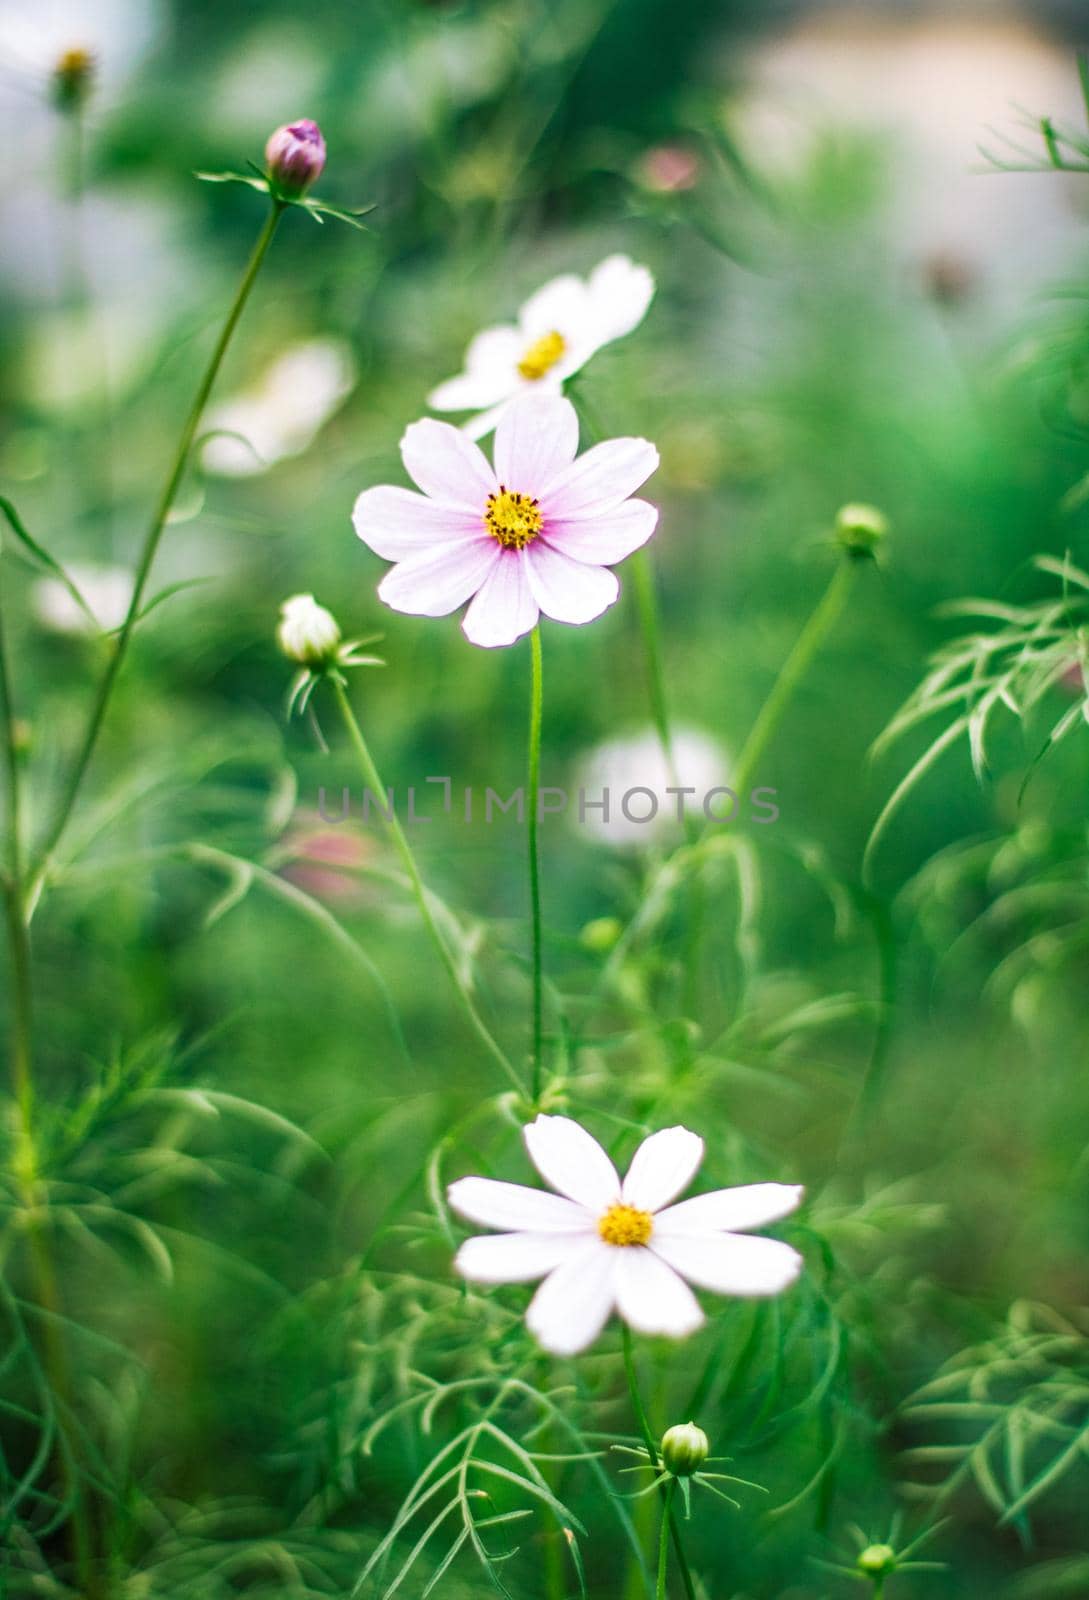 daisy garden - gardening, flowers and nature styled concept by Anneleven